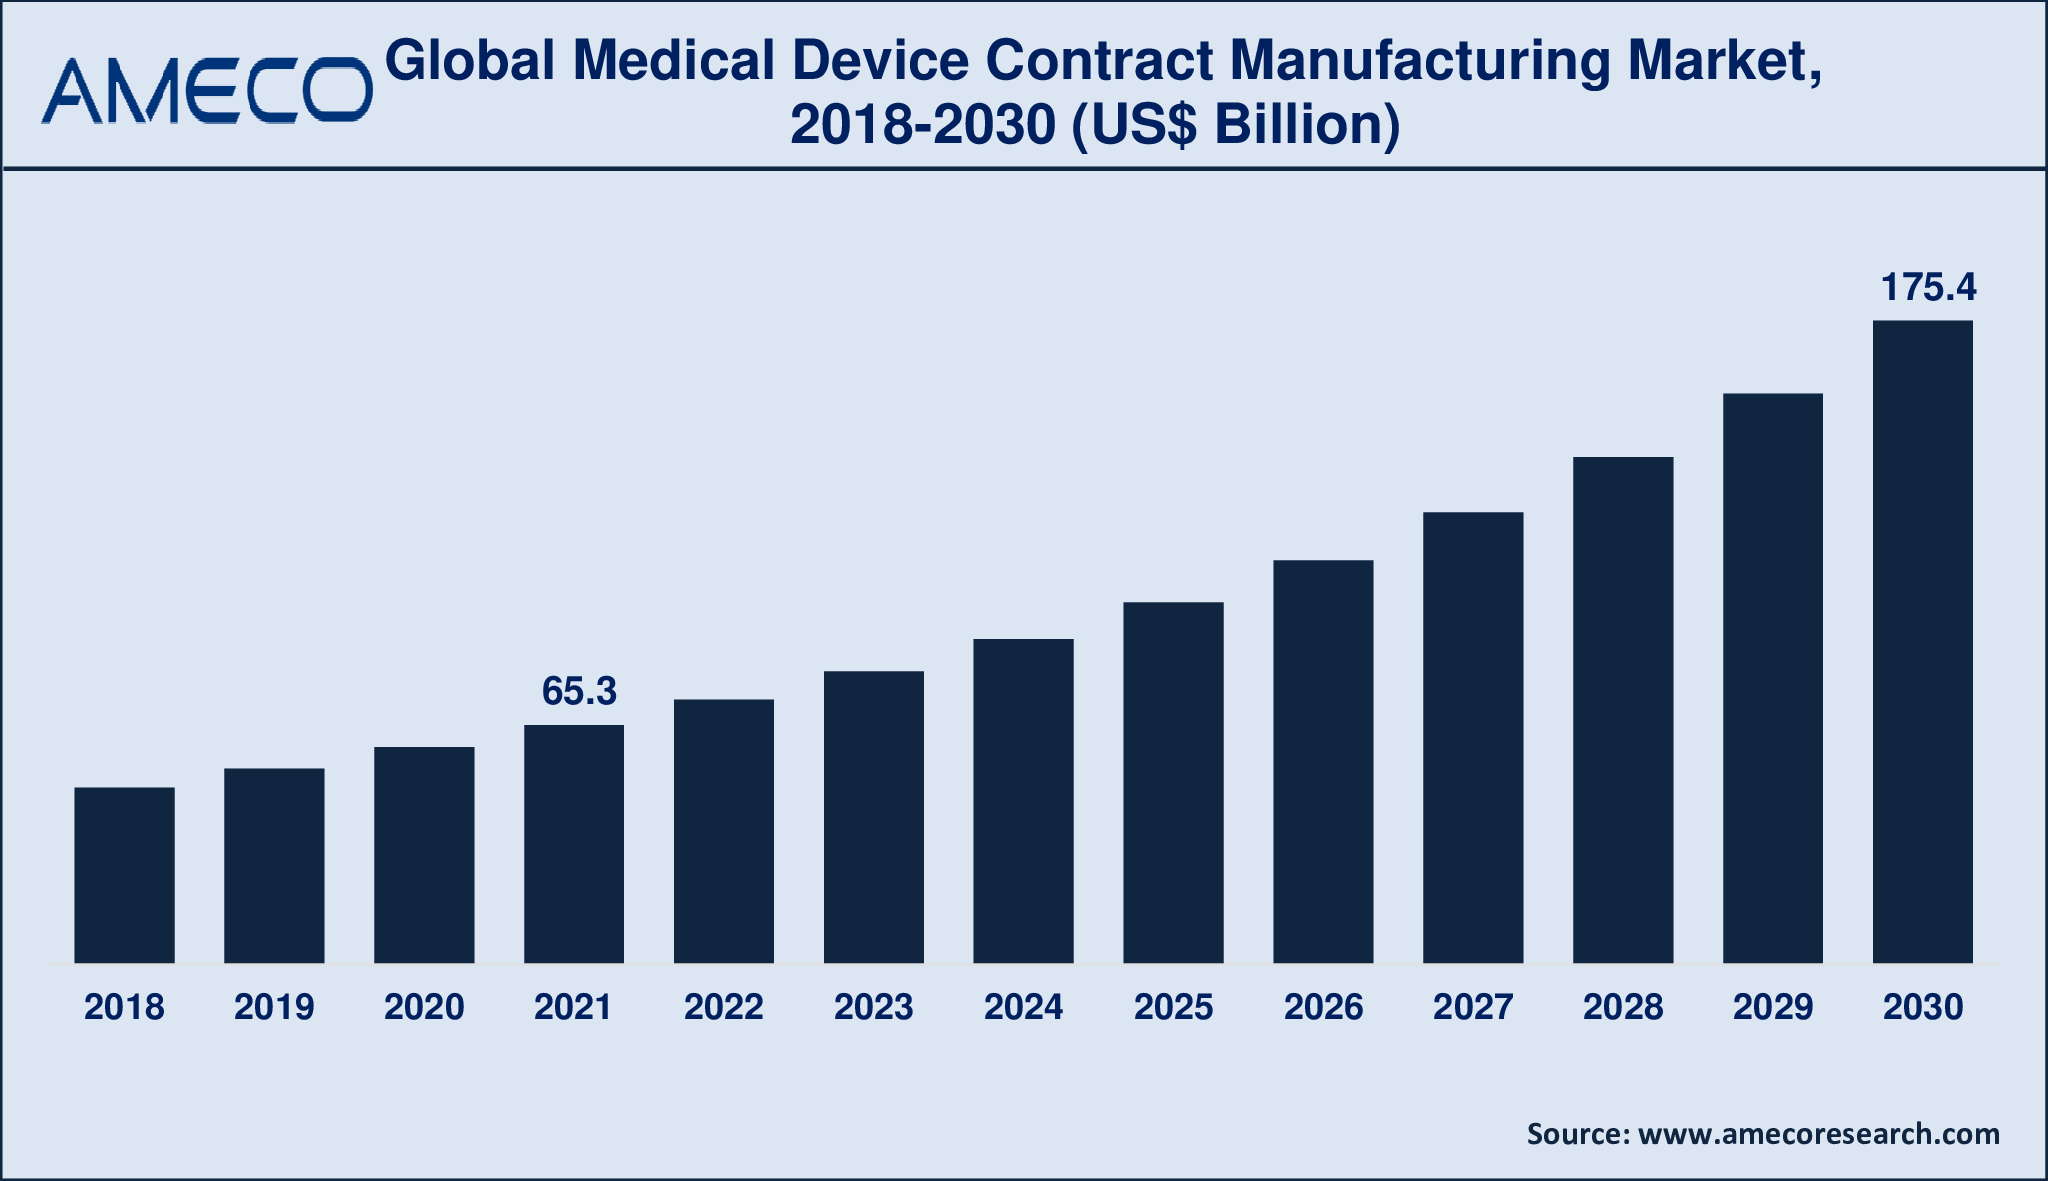 Medical Device Contract Manufacturing Market Dynamics